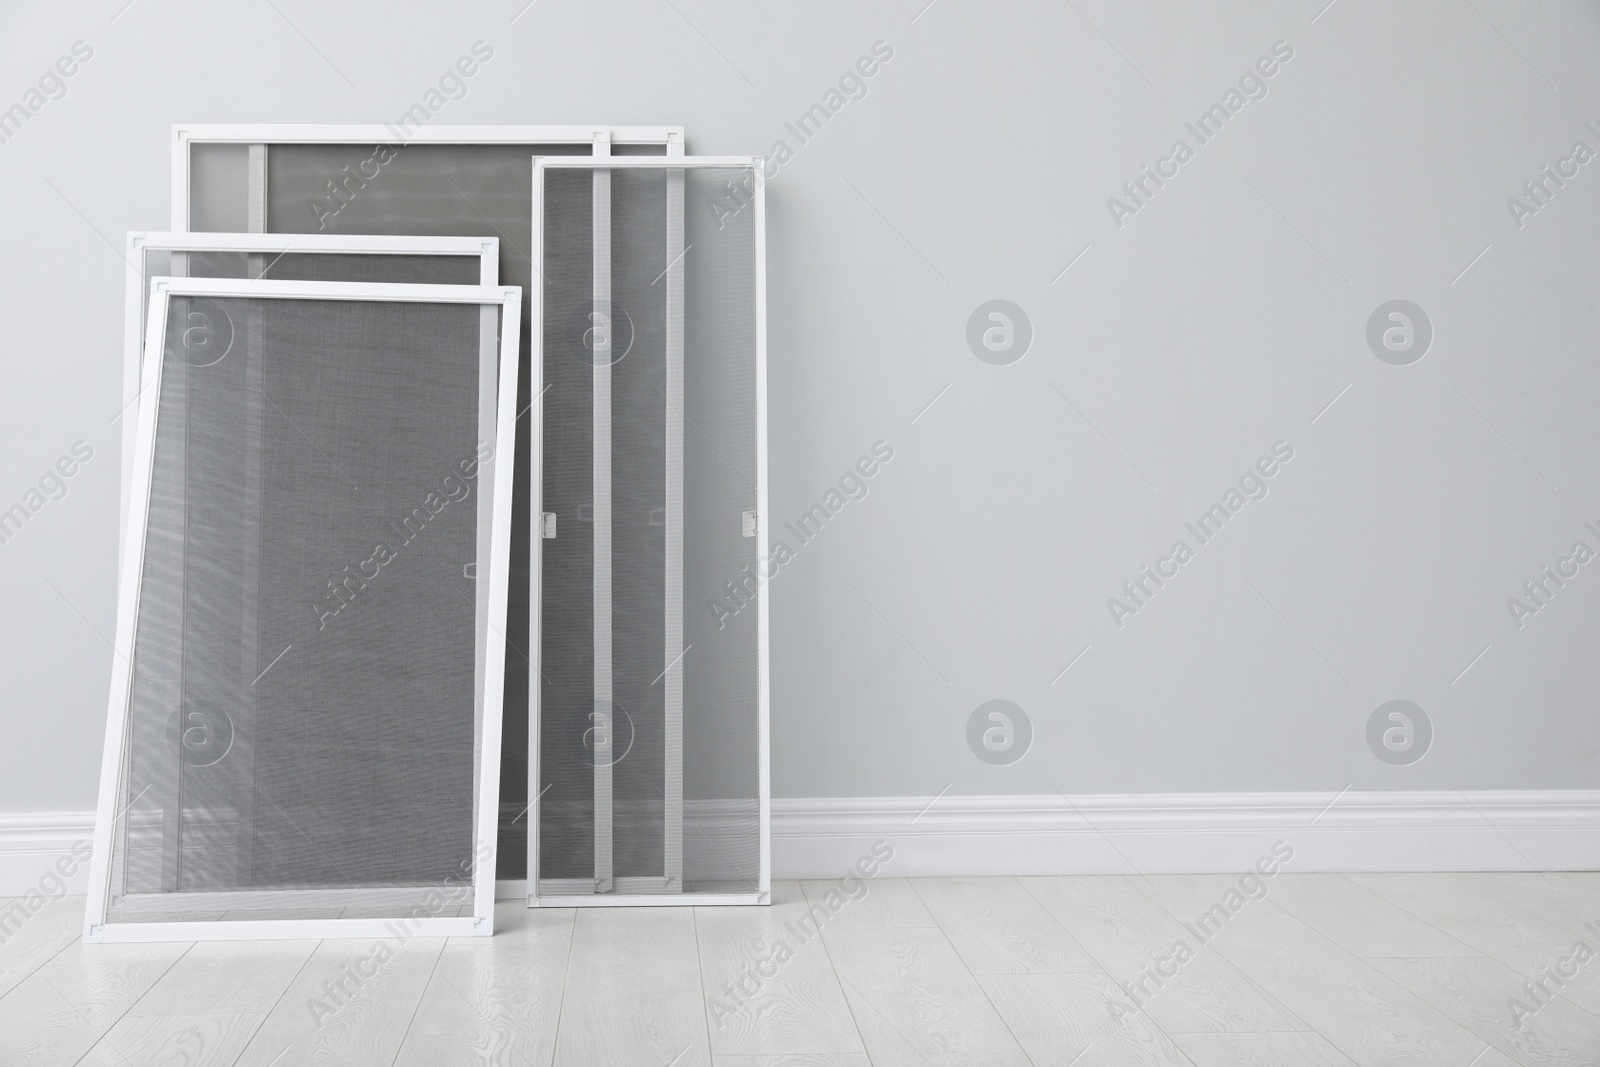 Photo of Set of window screens near light grey wall indoors. Space for text